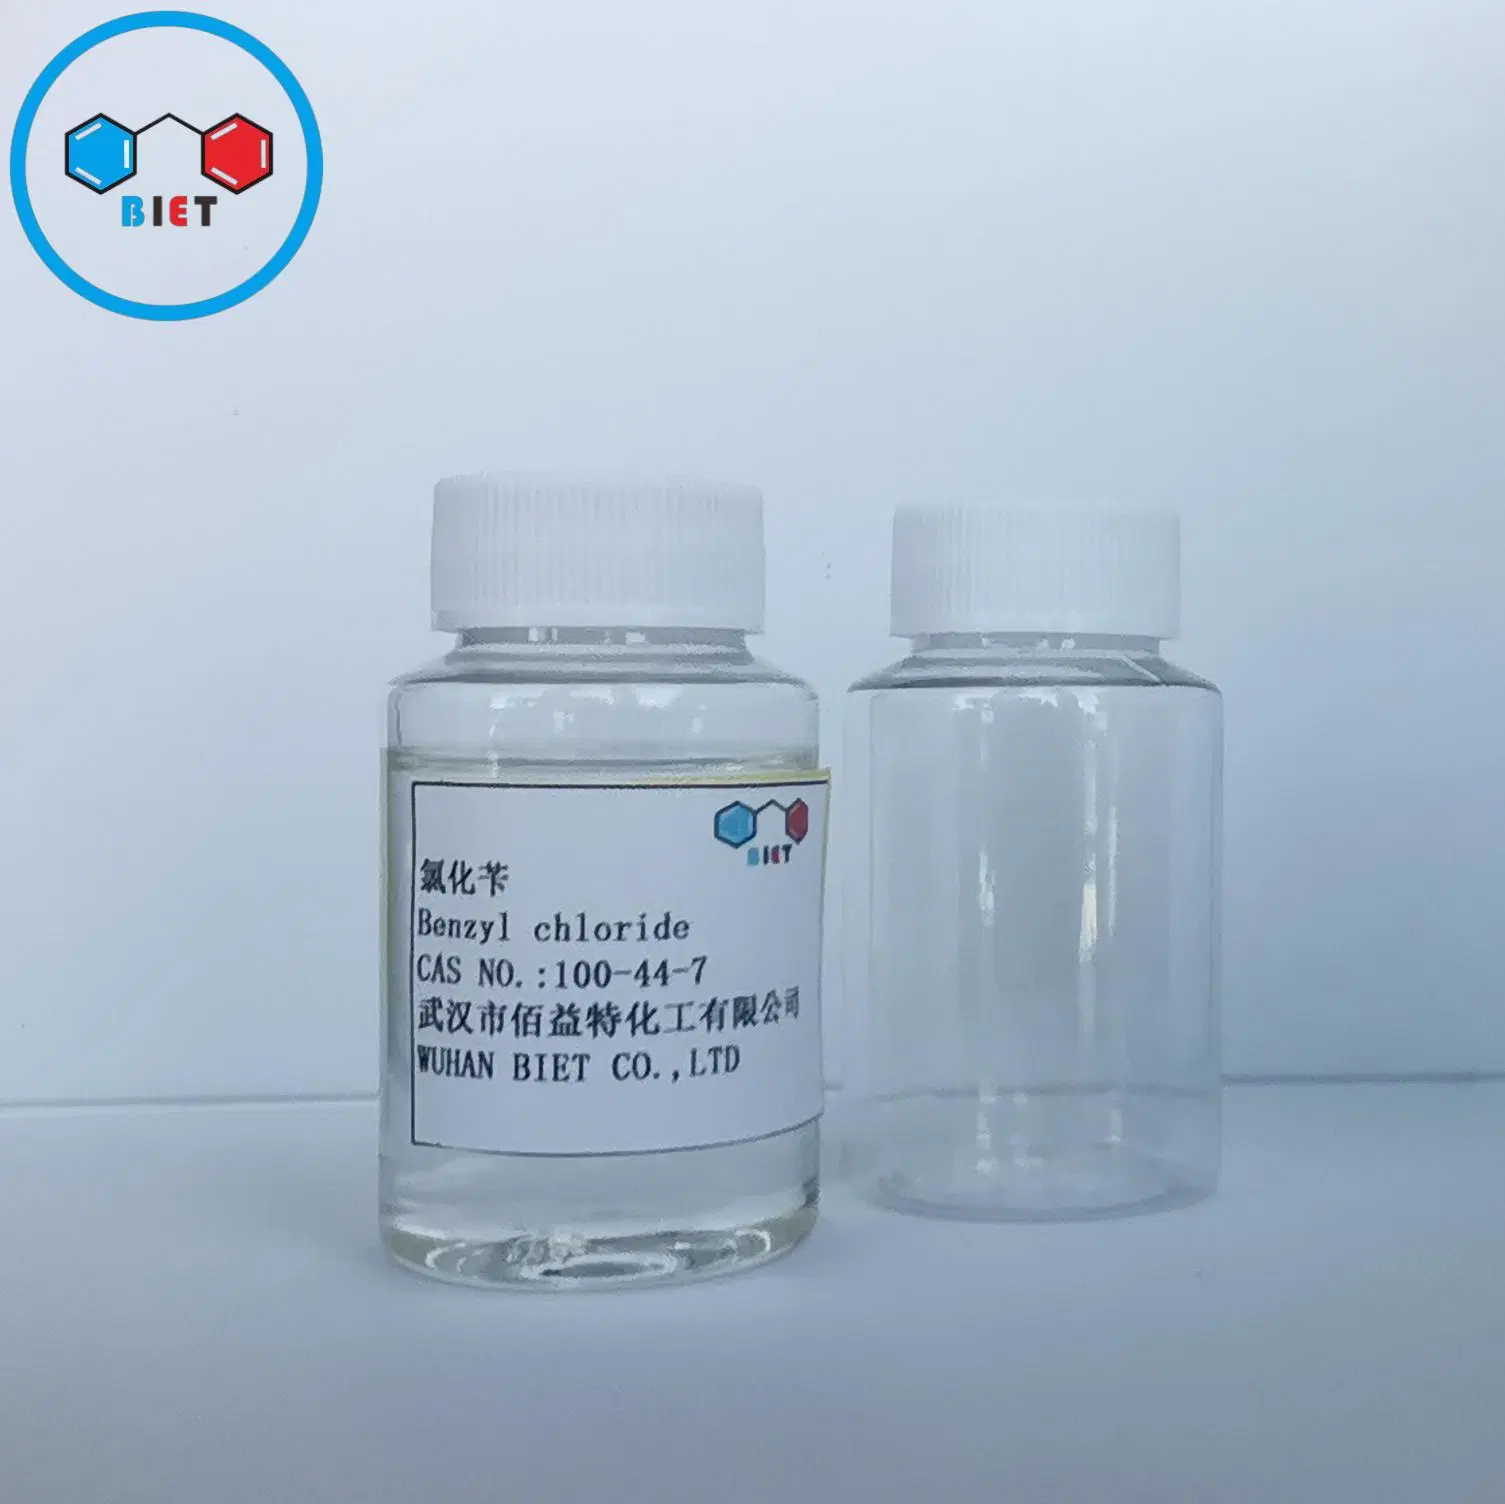 Chinese Manufacture Benzyl Chloride